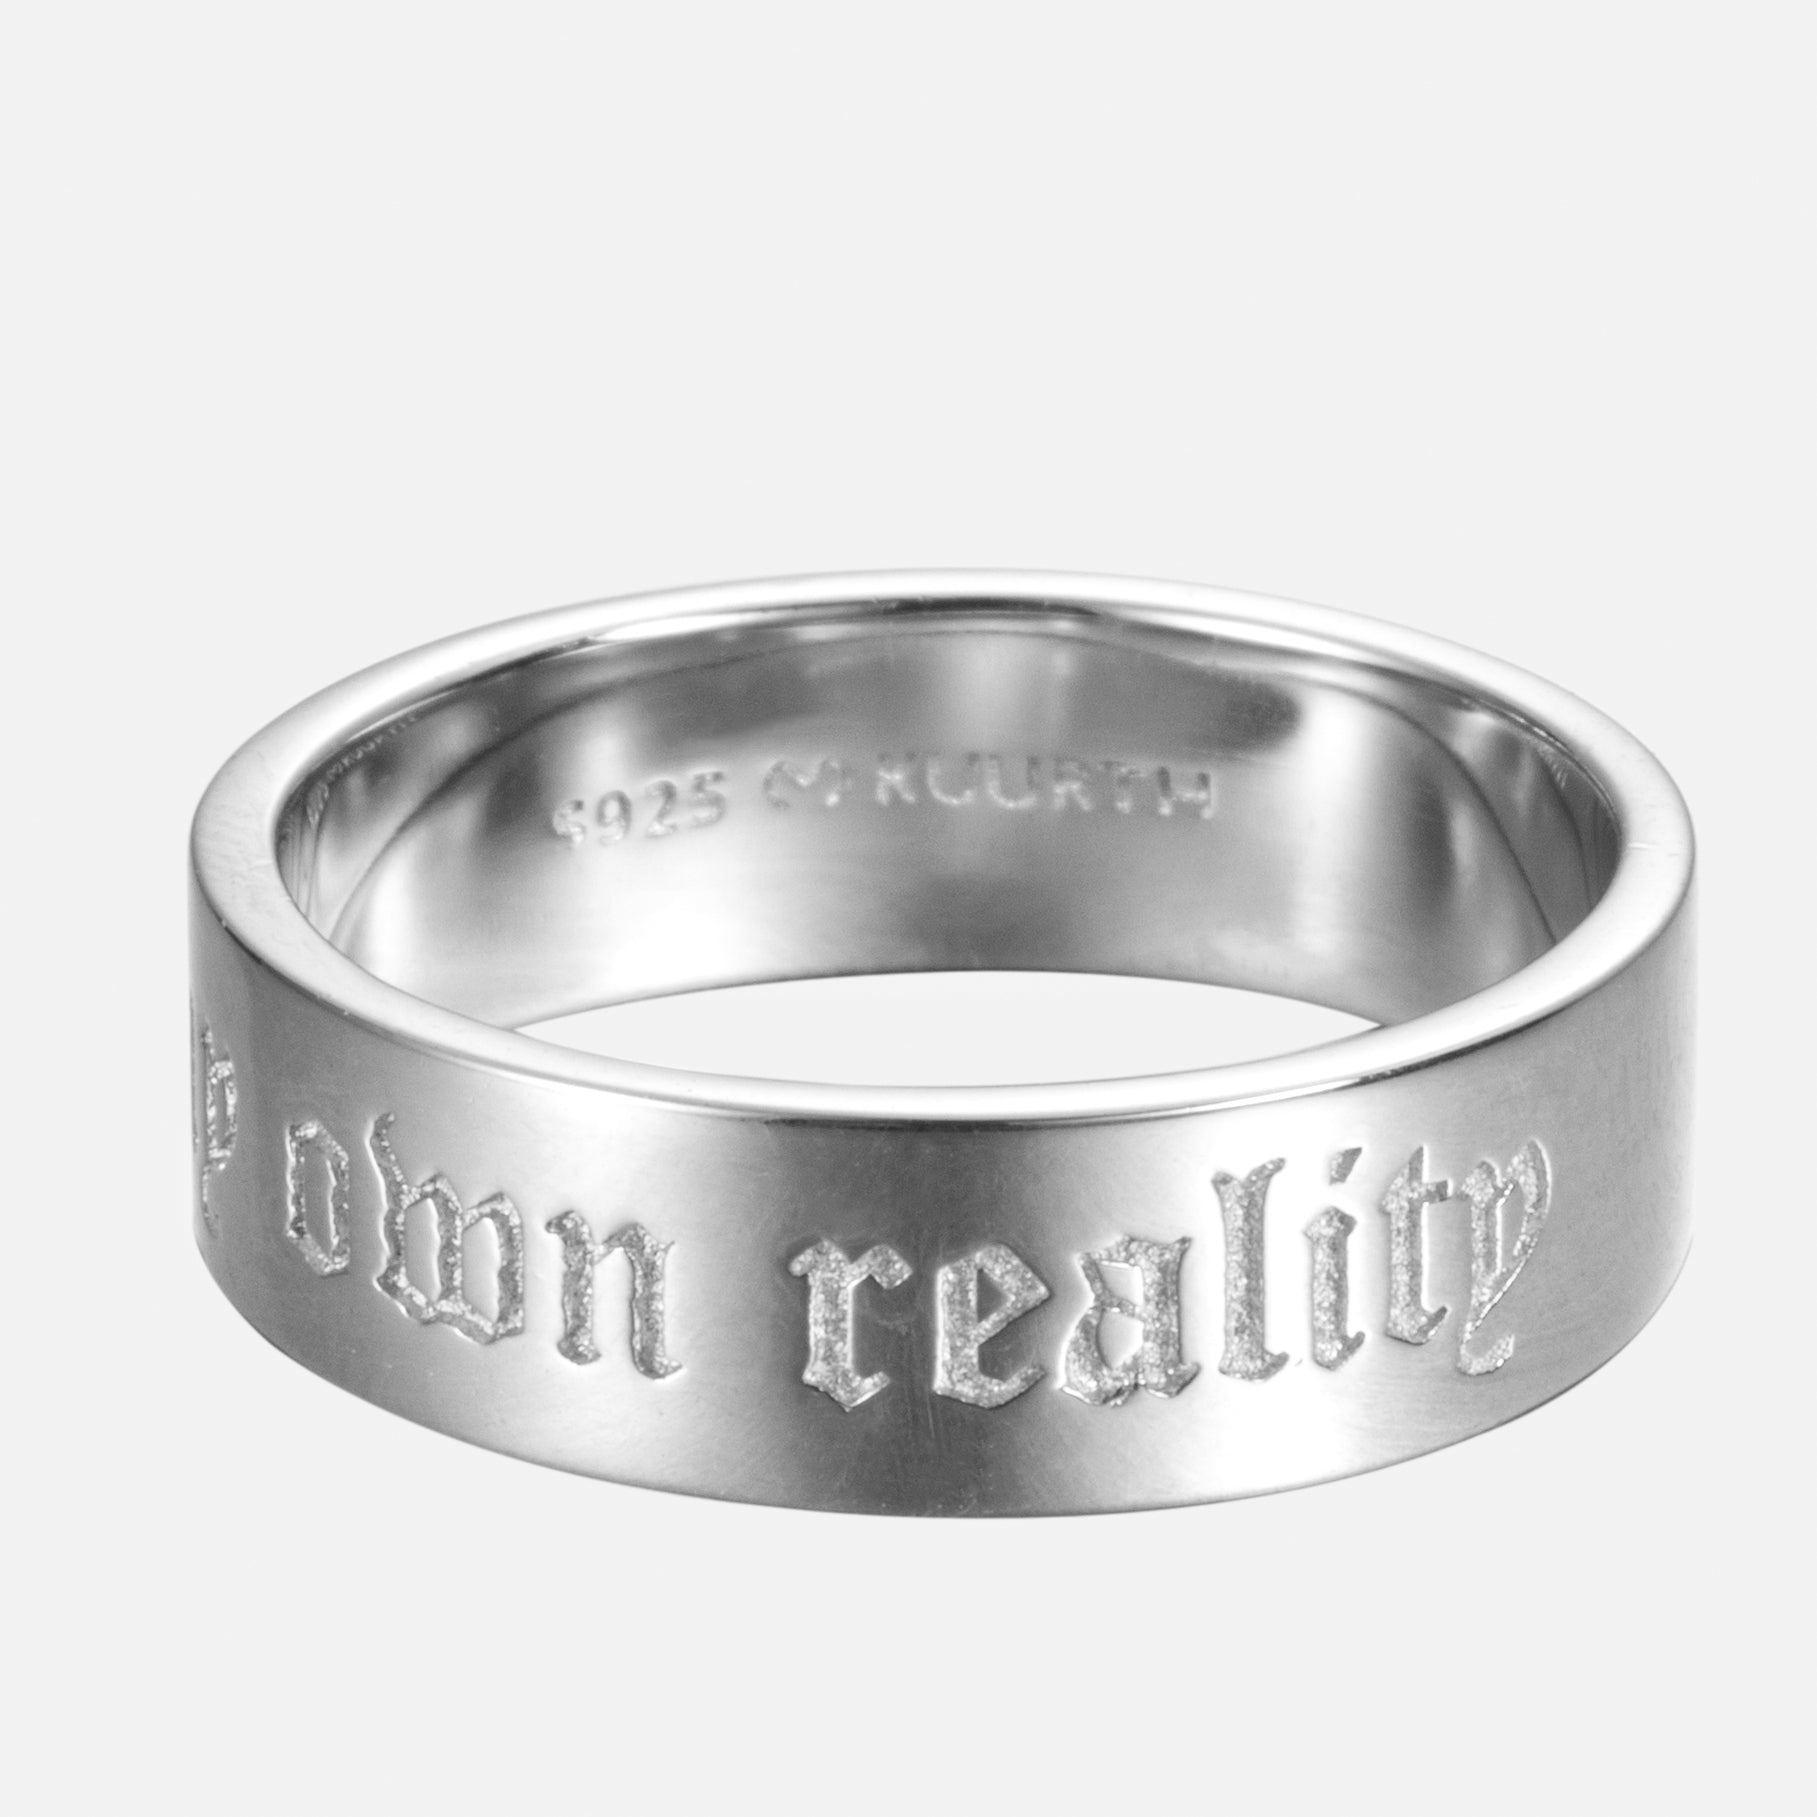 My own reality - Ring